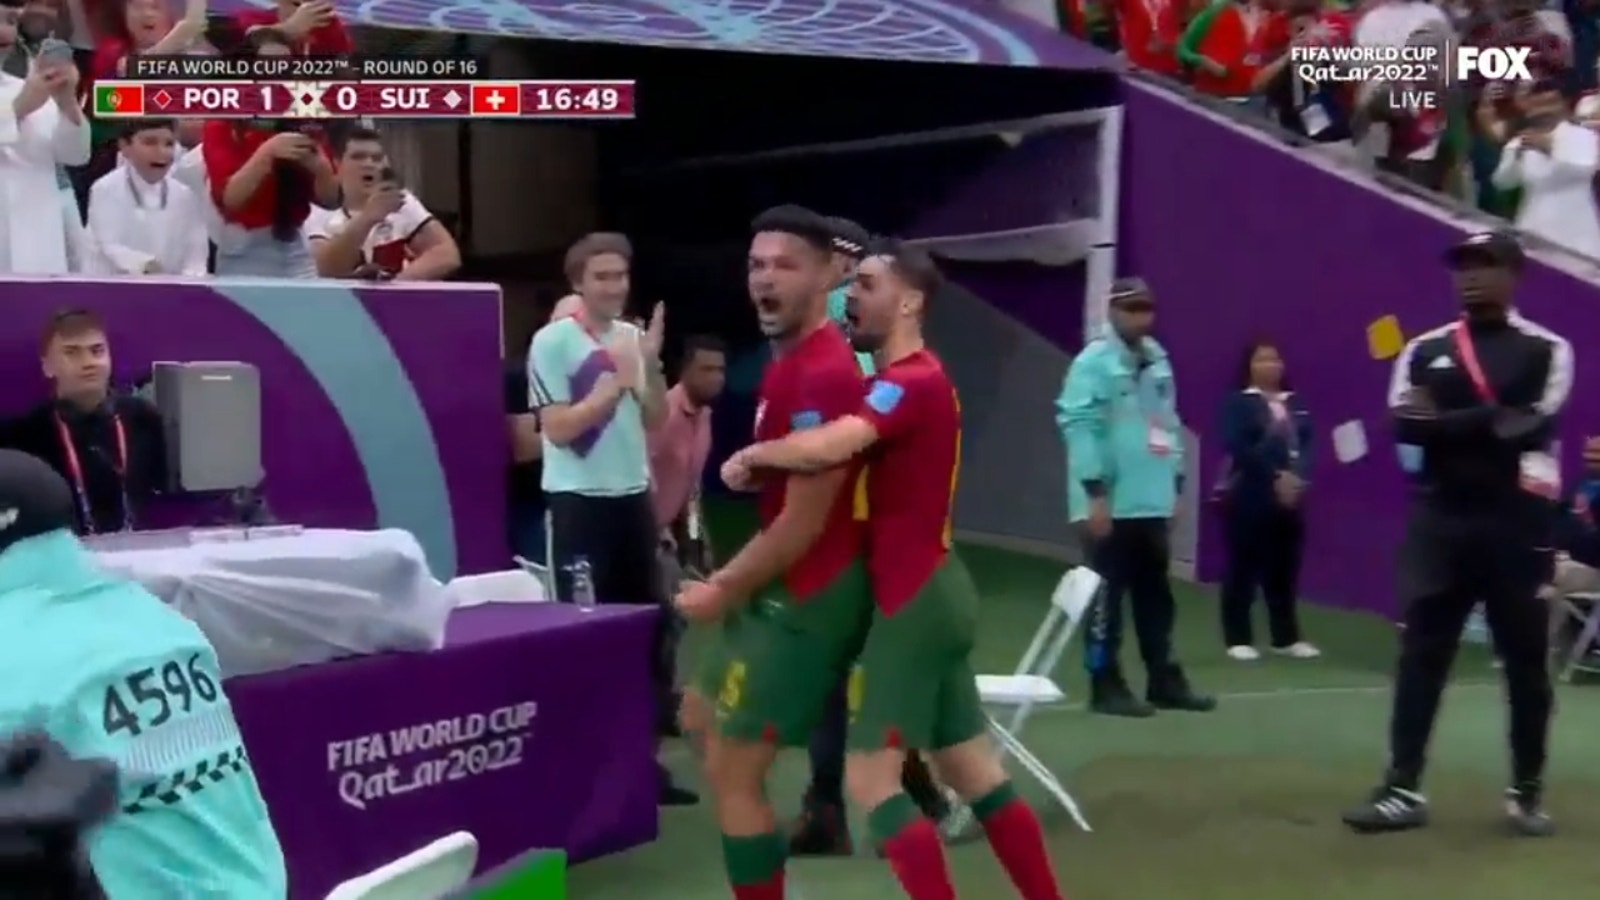 Portugal's Goncalo Ramos scored a hat-trick against Switzerland